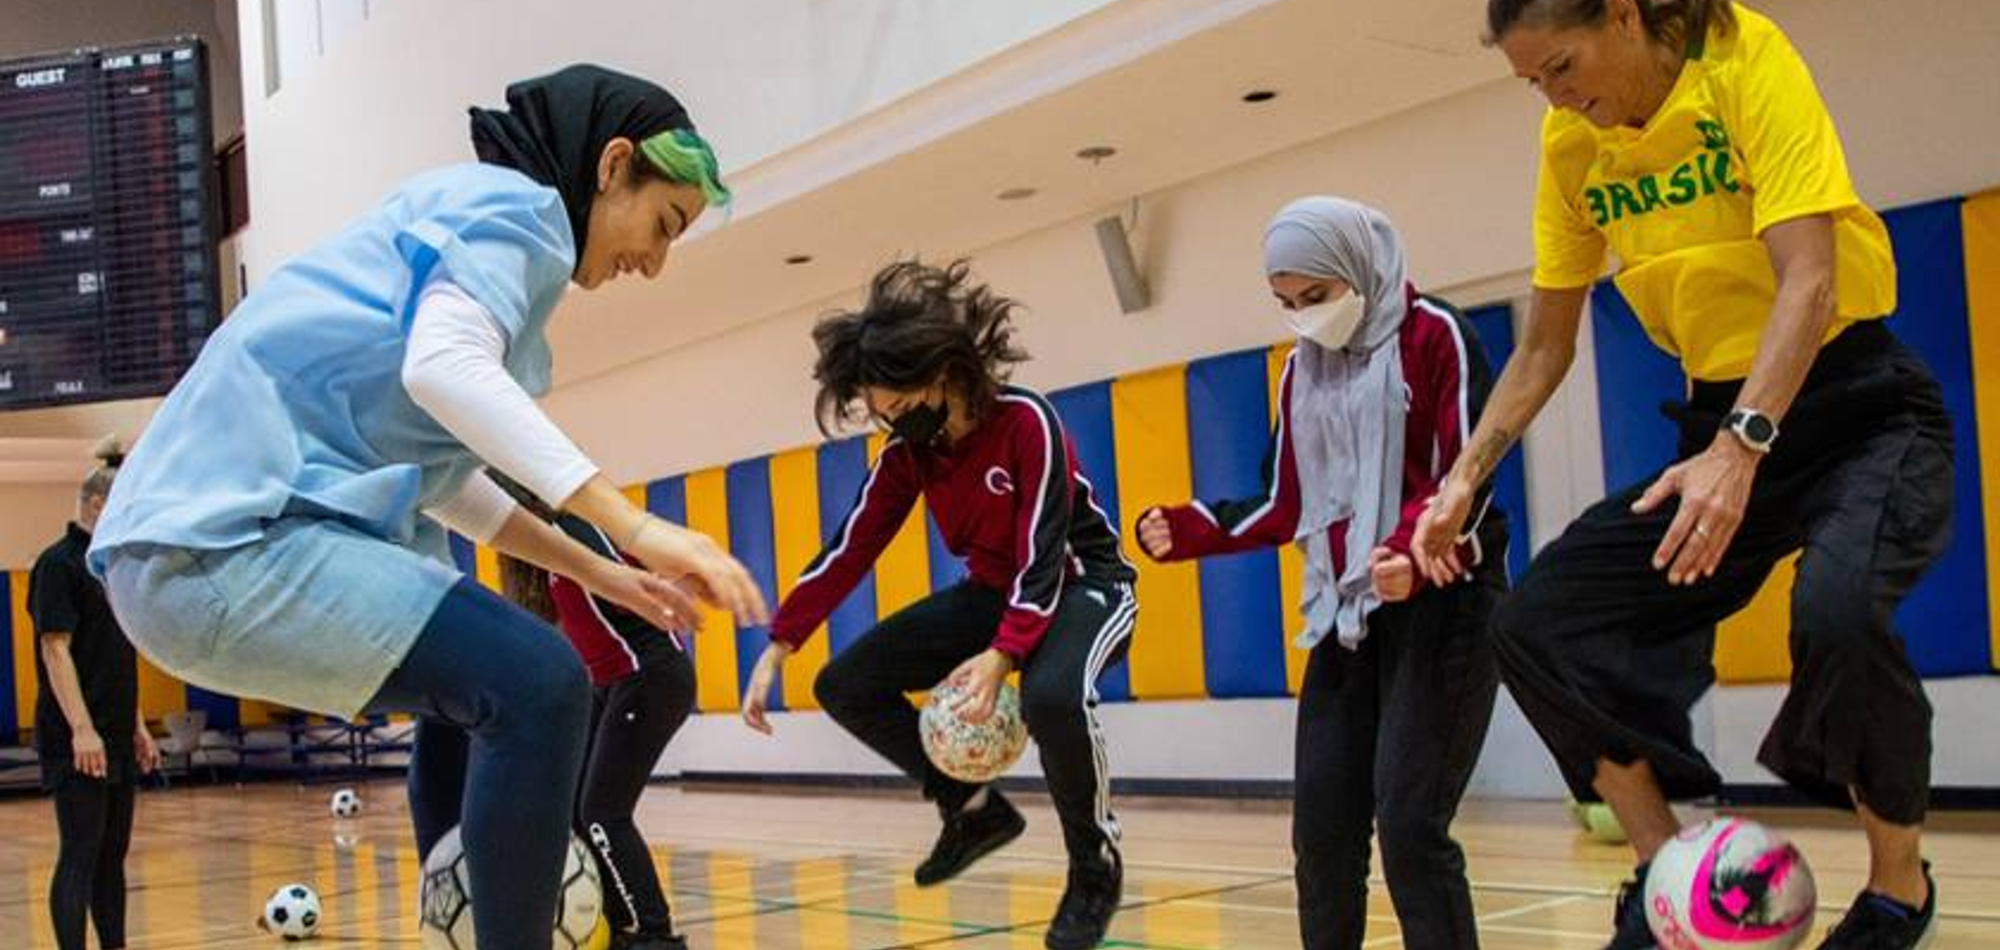 Qatar Foundation Students Learn to Express Themselves Using Football